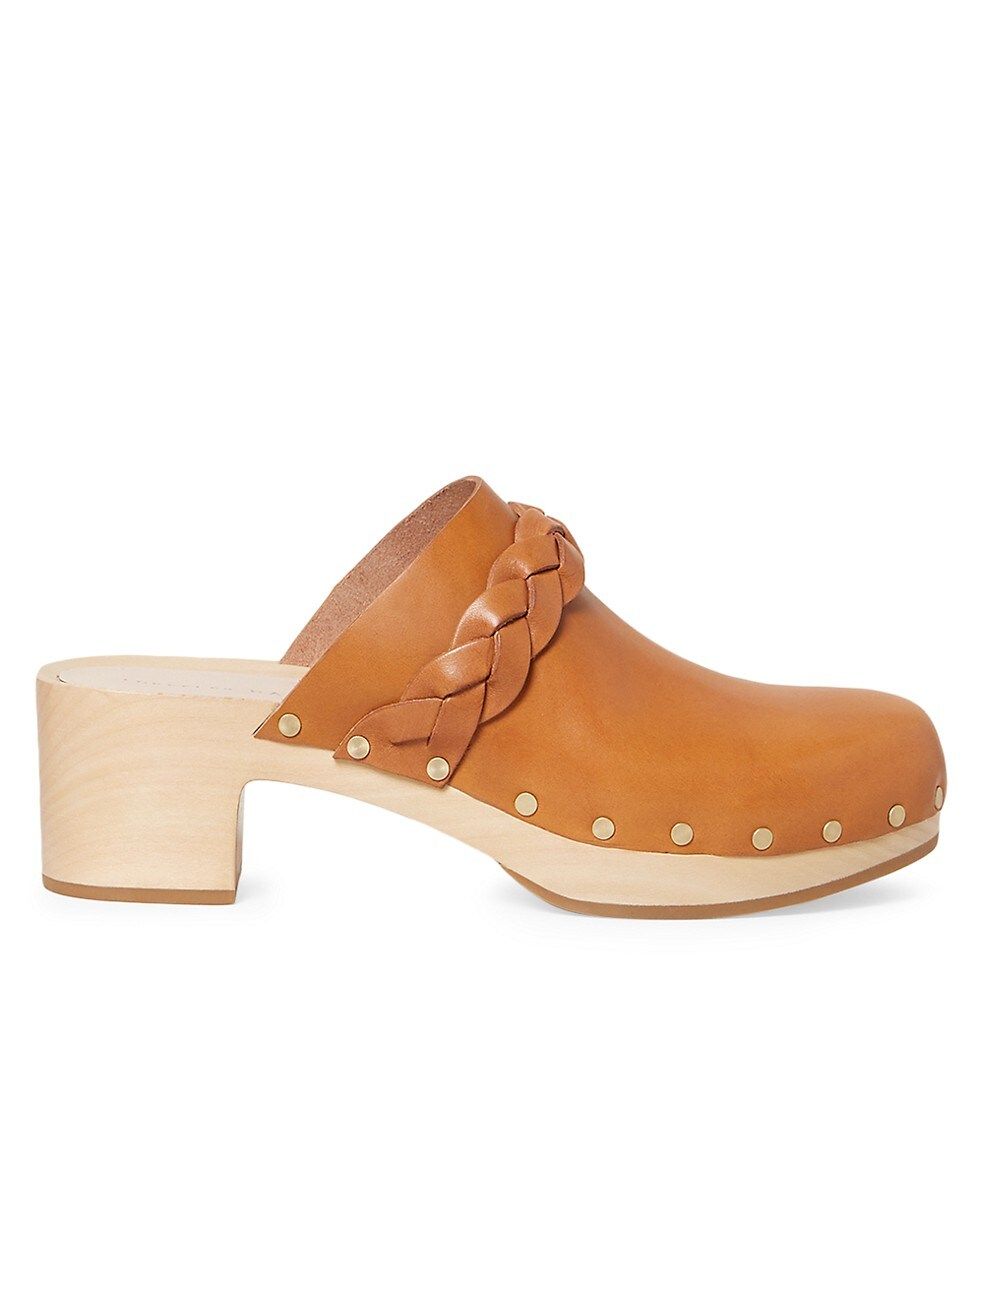 Braided Leather Clogs | Saks Fifth Avenue